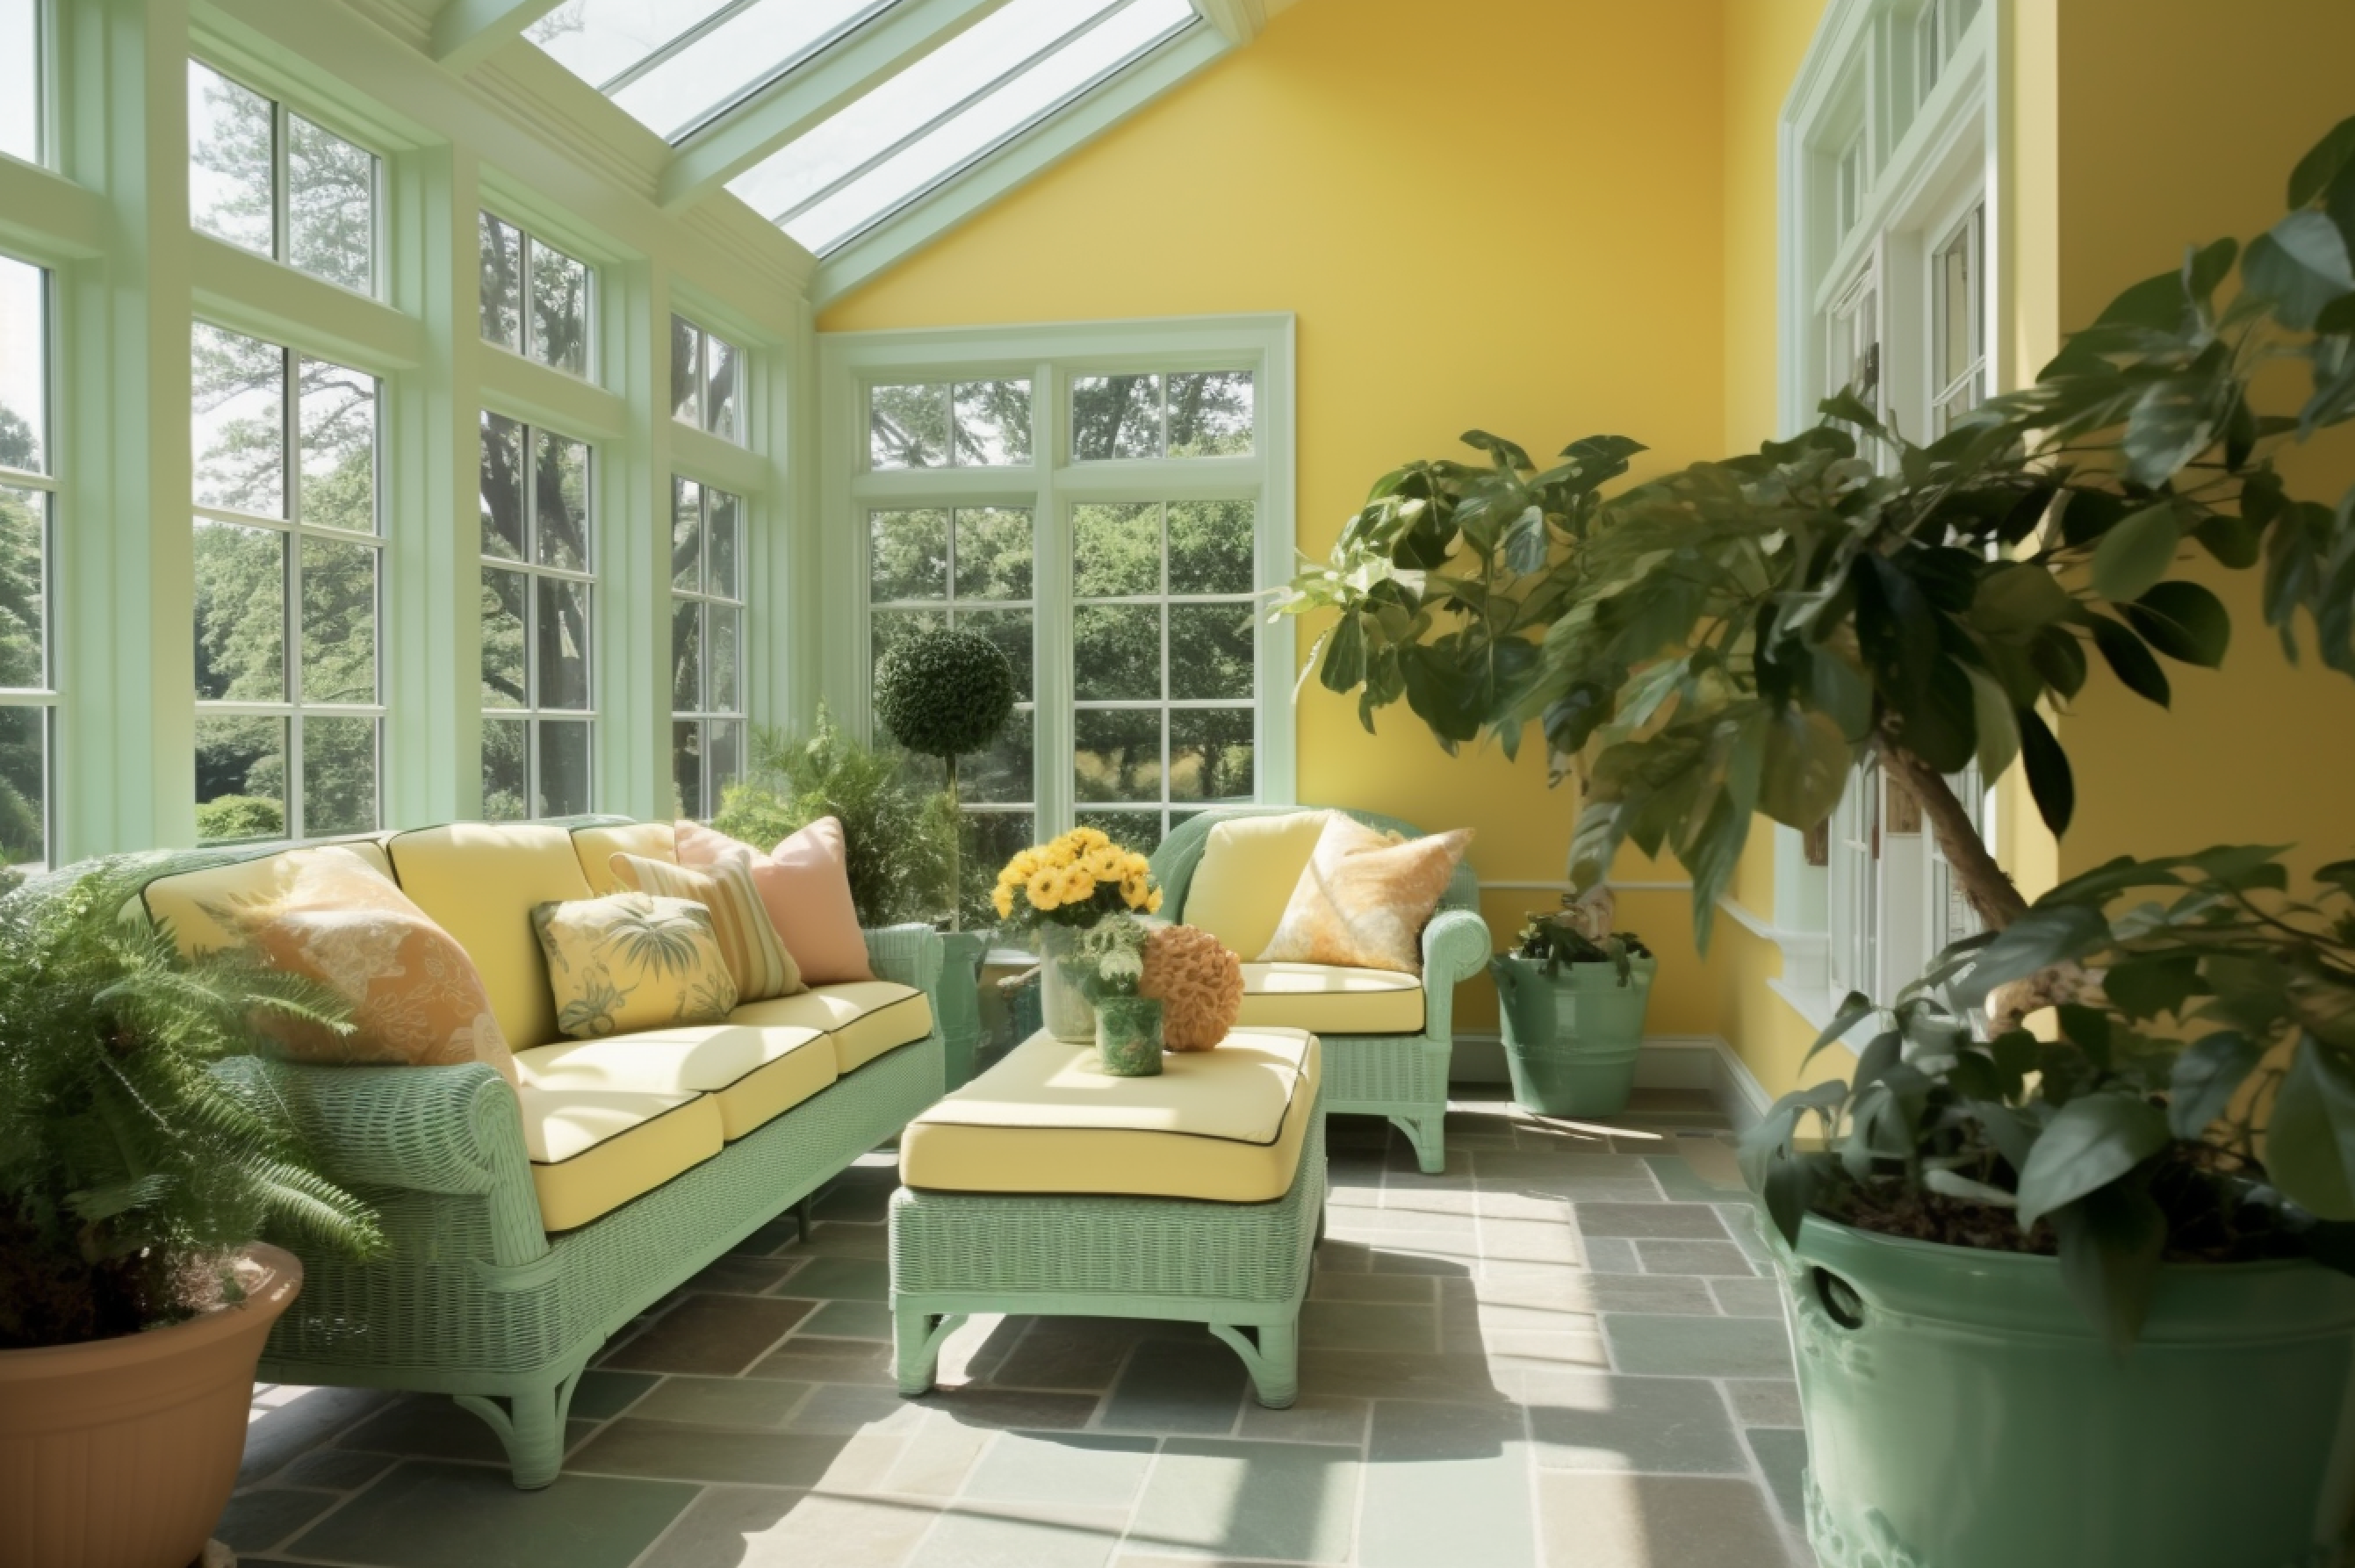 7. Green and Yellow Summer Fresh Scheme. A sunroom that feels like a sunny summer day, every day.